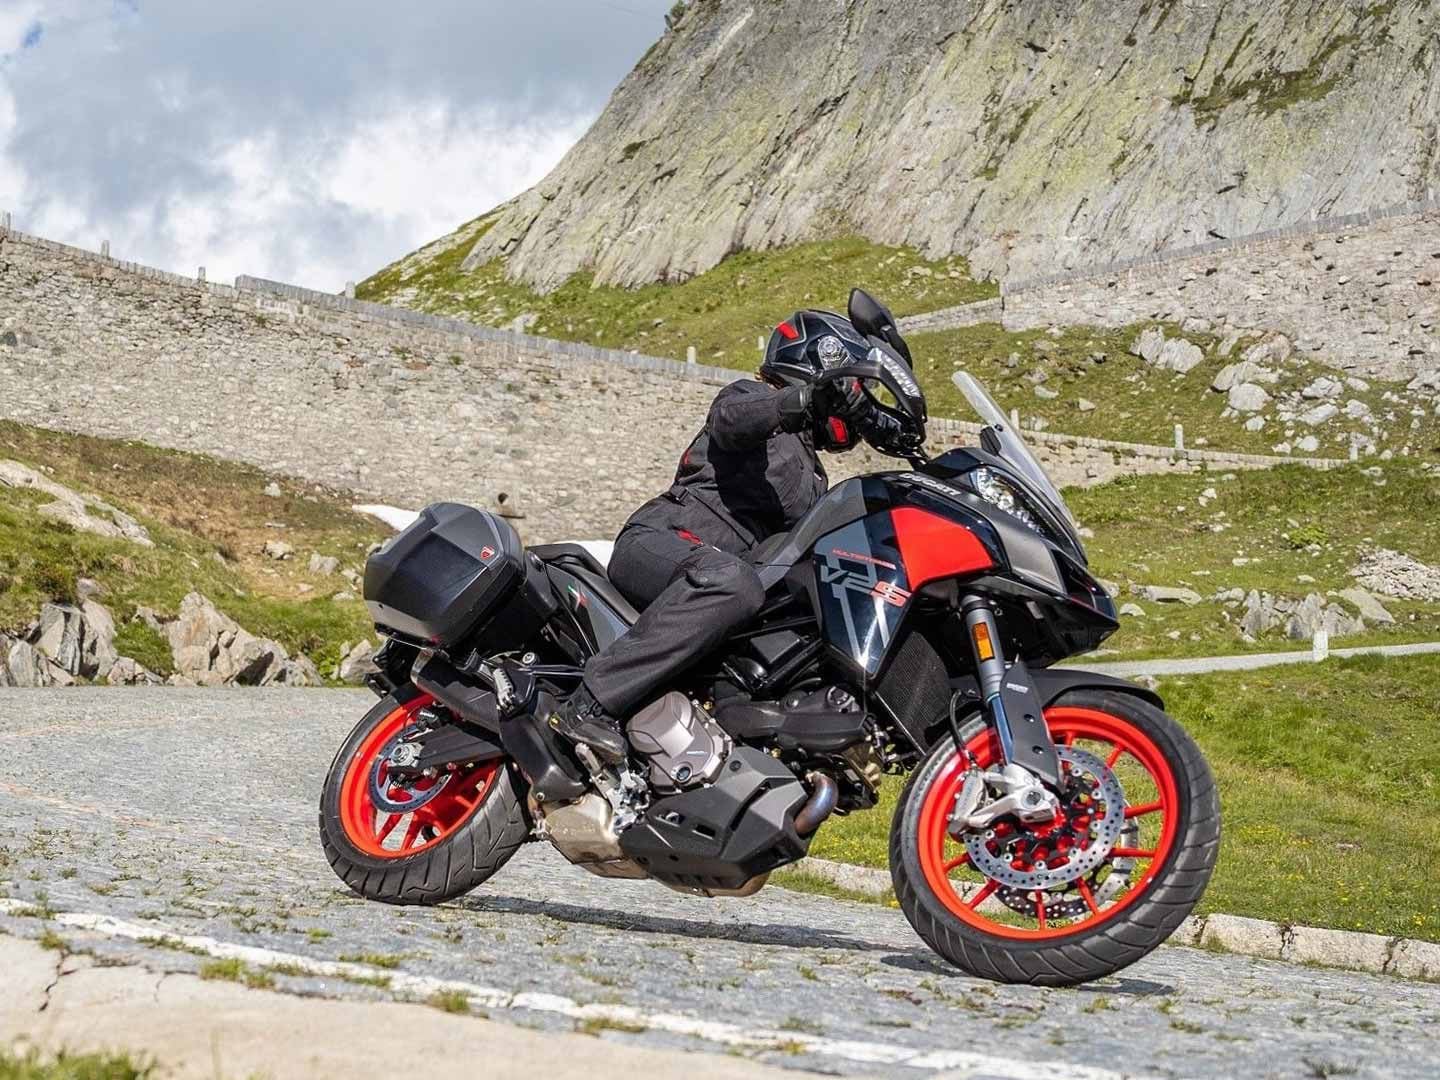 Ducati’s announced the return of the Multistrada V2 S for 2024. No mechanical changes come for the new model year, just this fresh color scheme.